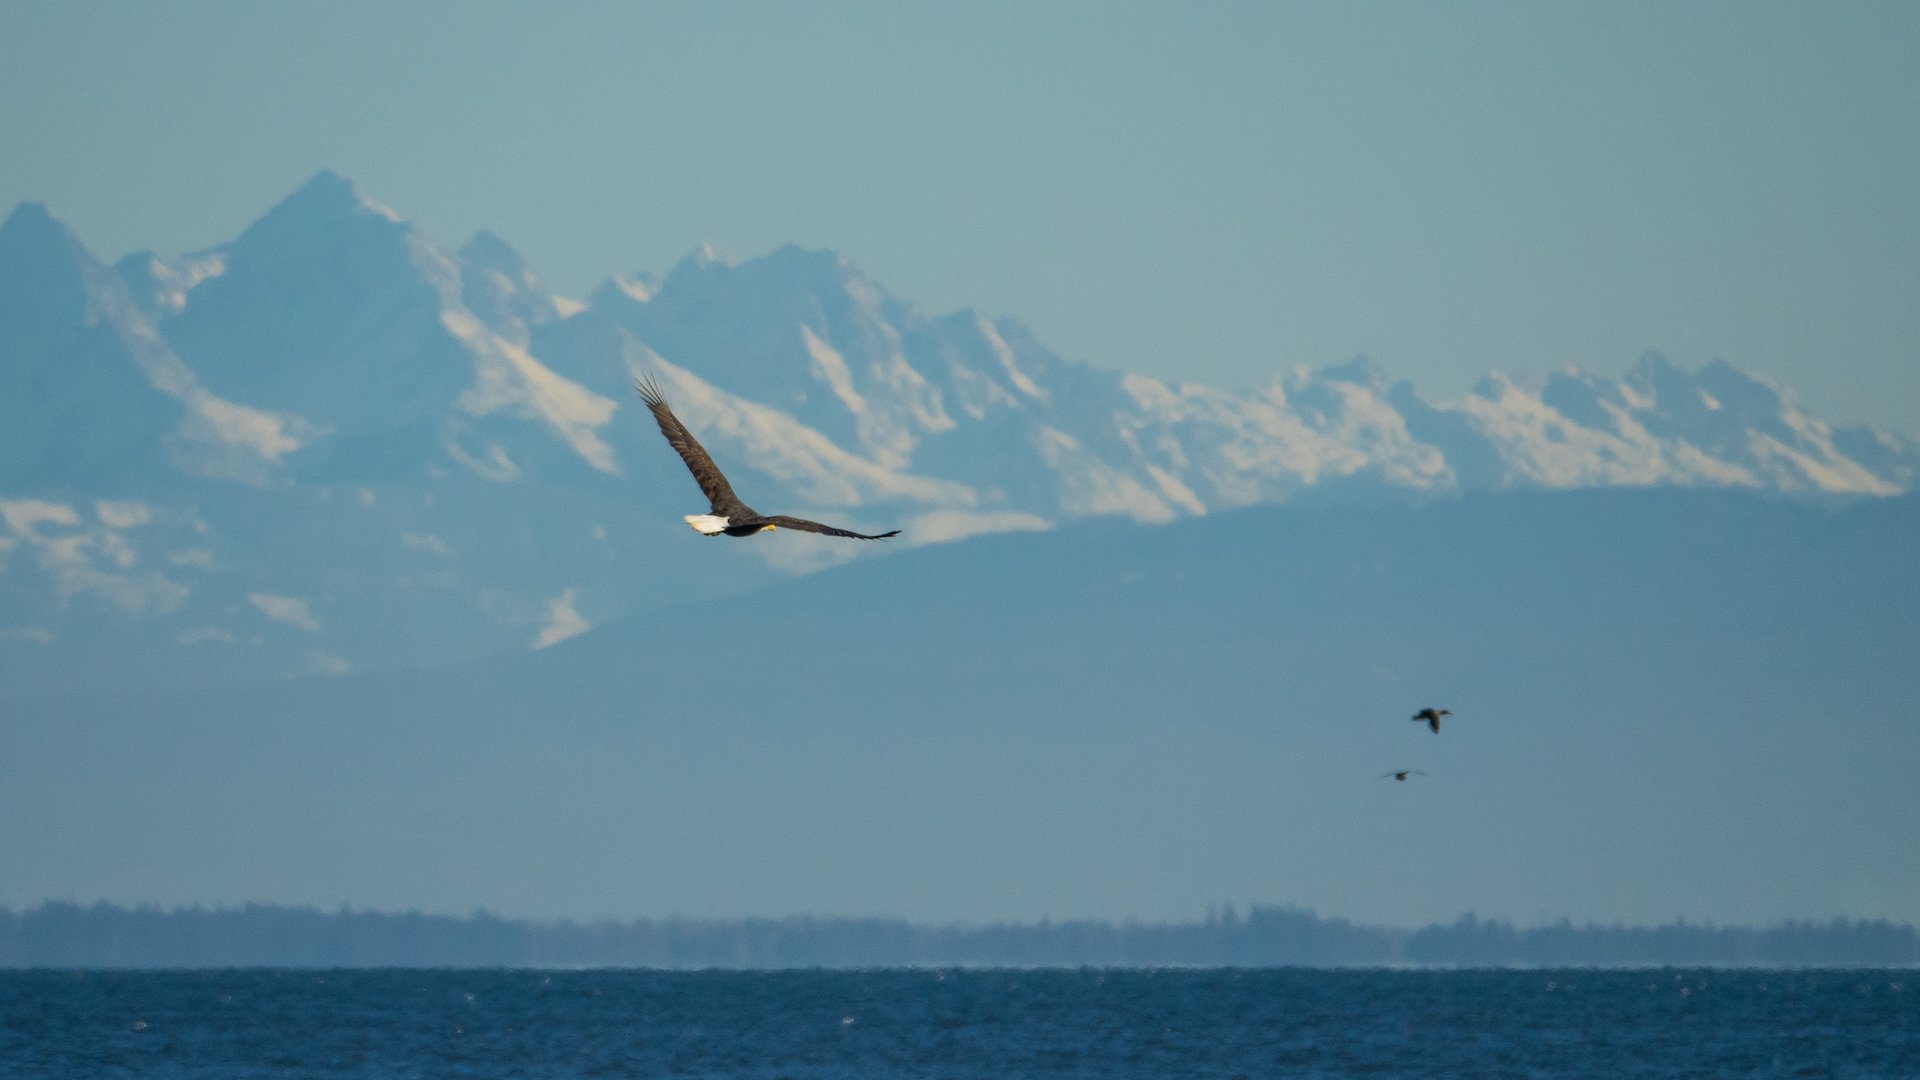  Eagles soaring over the tidal marshes and in front of the mountains.  